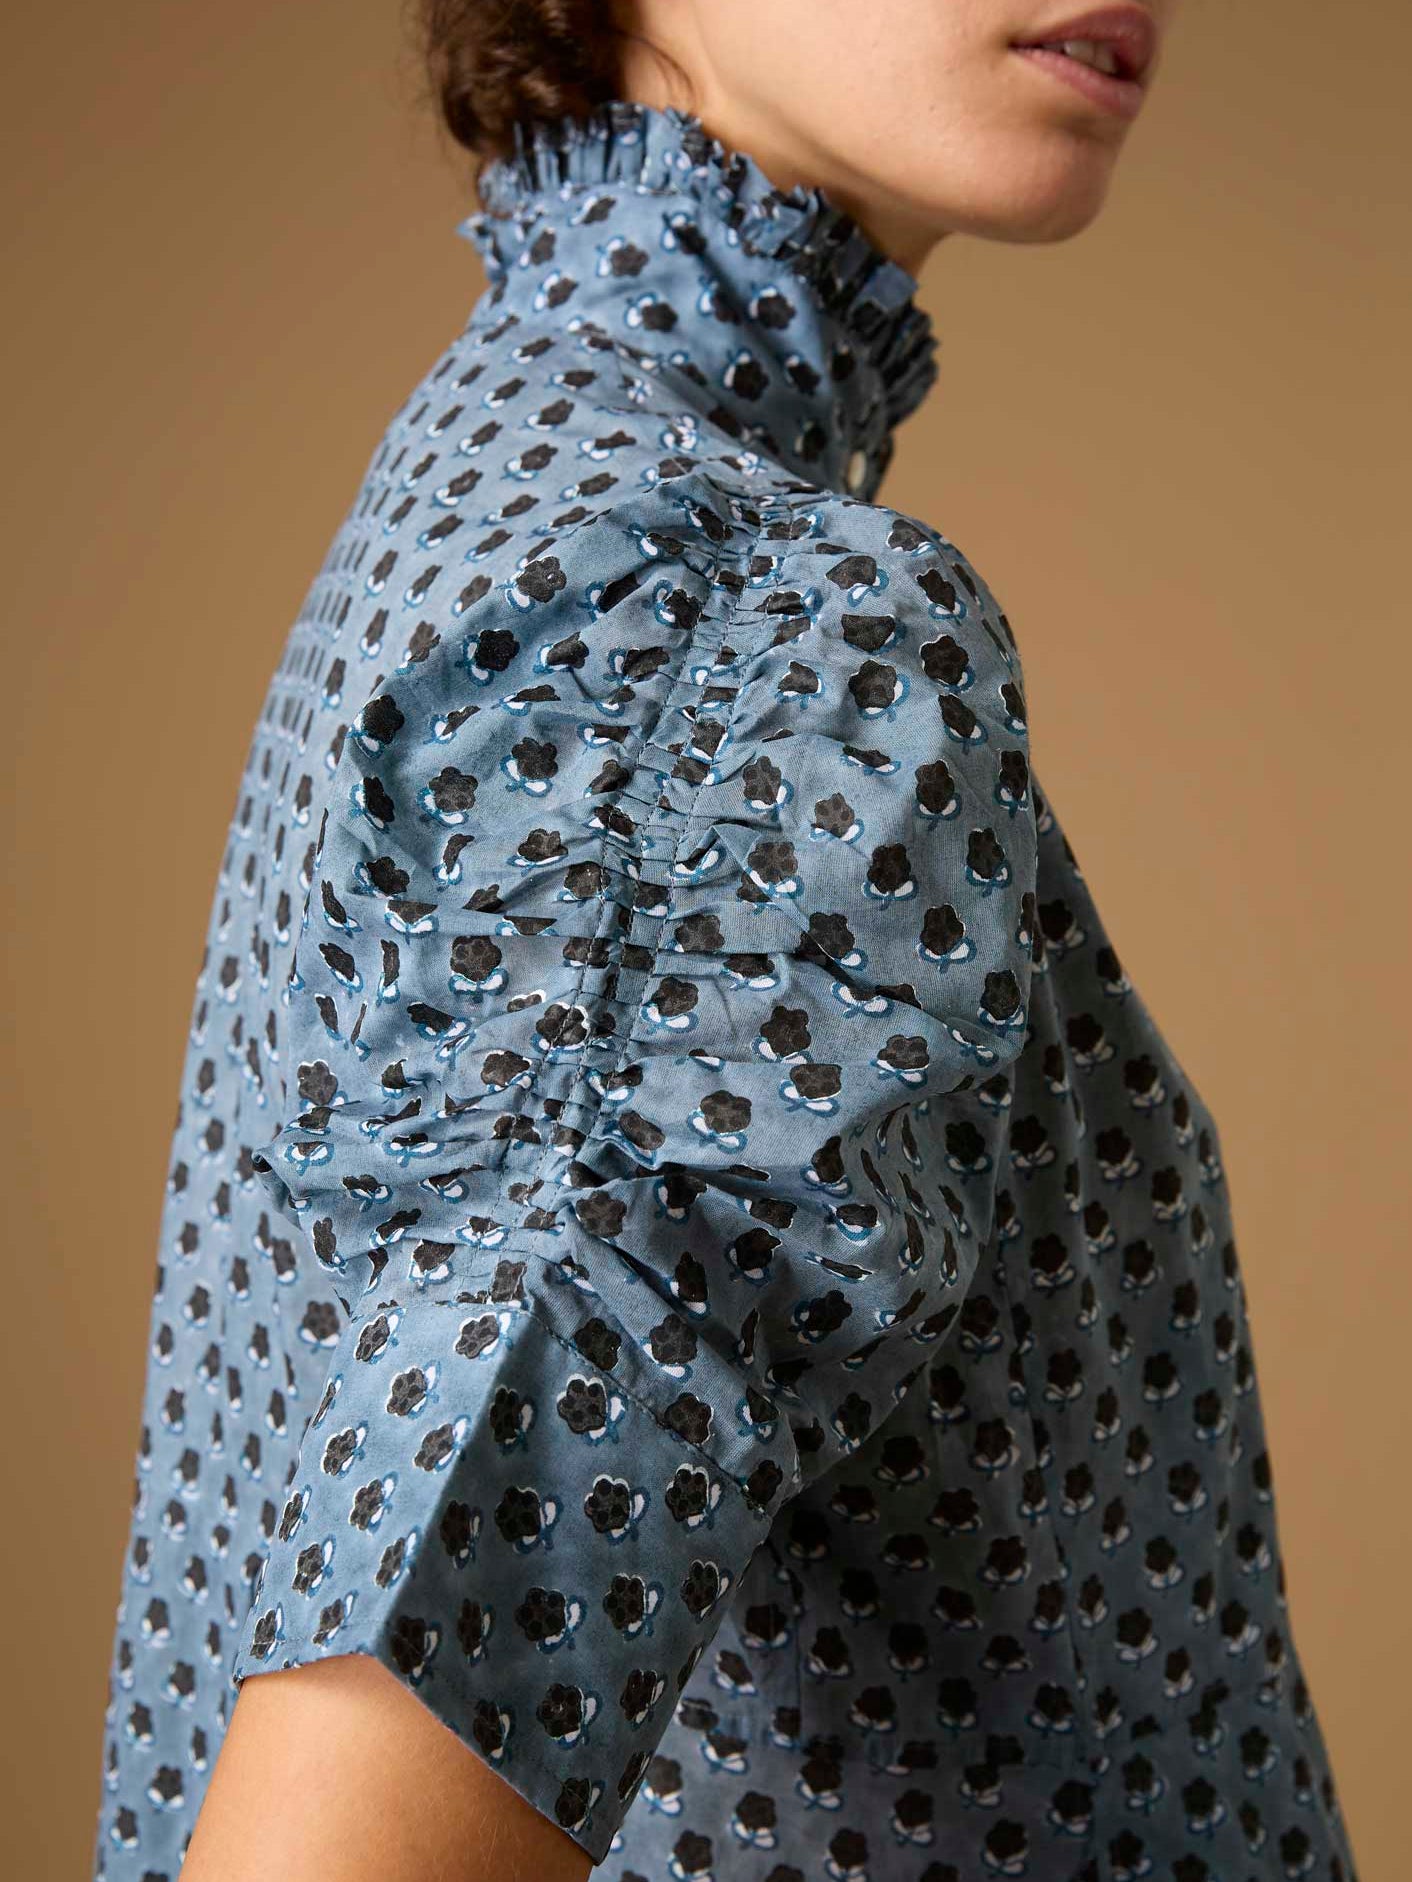 Sleeve detail of Venetia Blue Grey / black Voile Dress by Thierry Colson